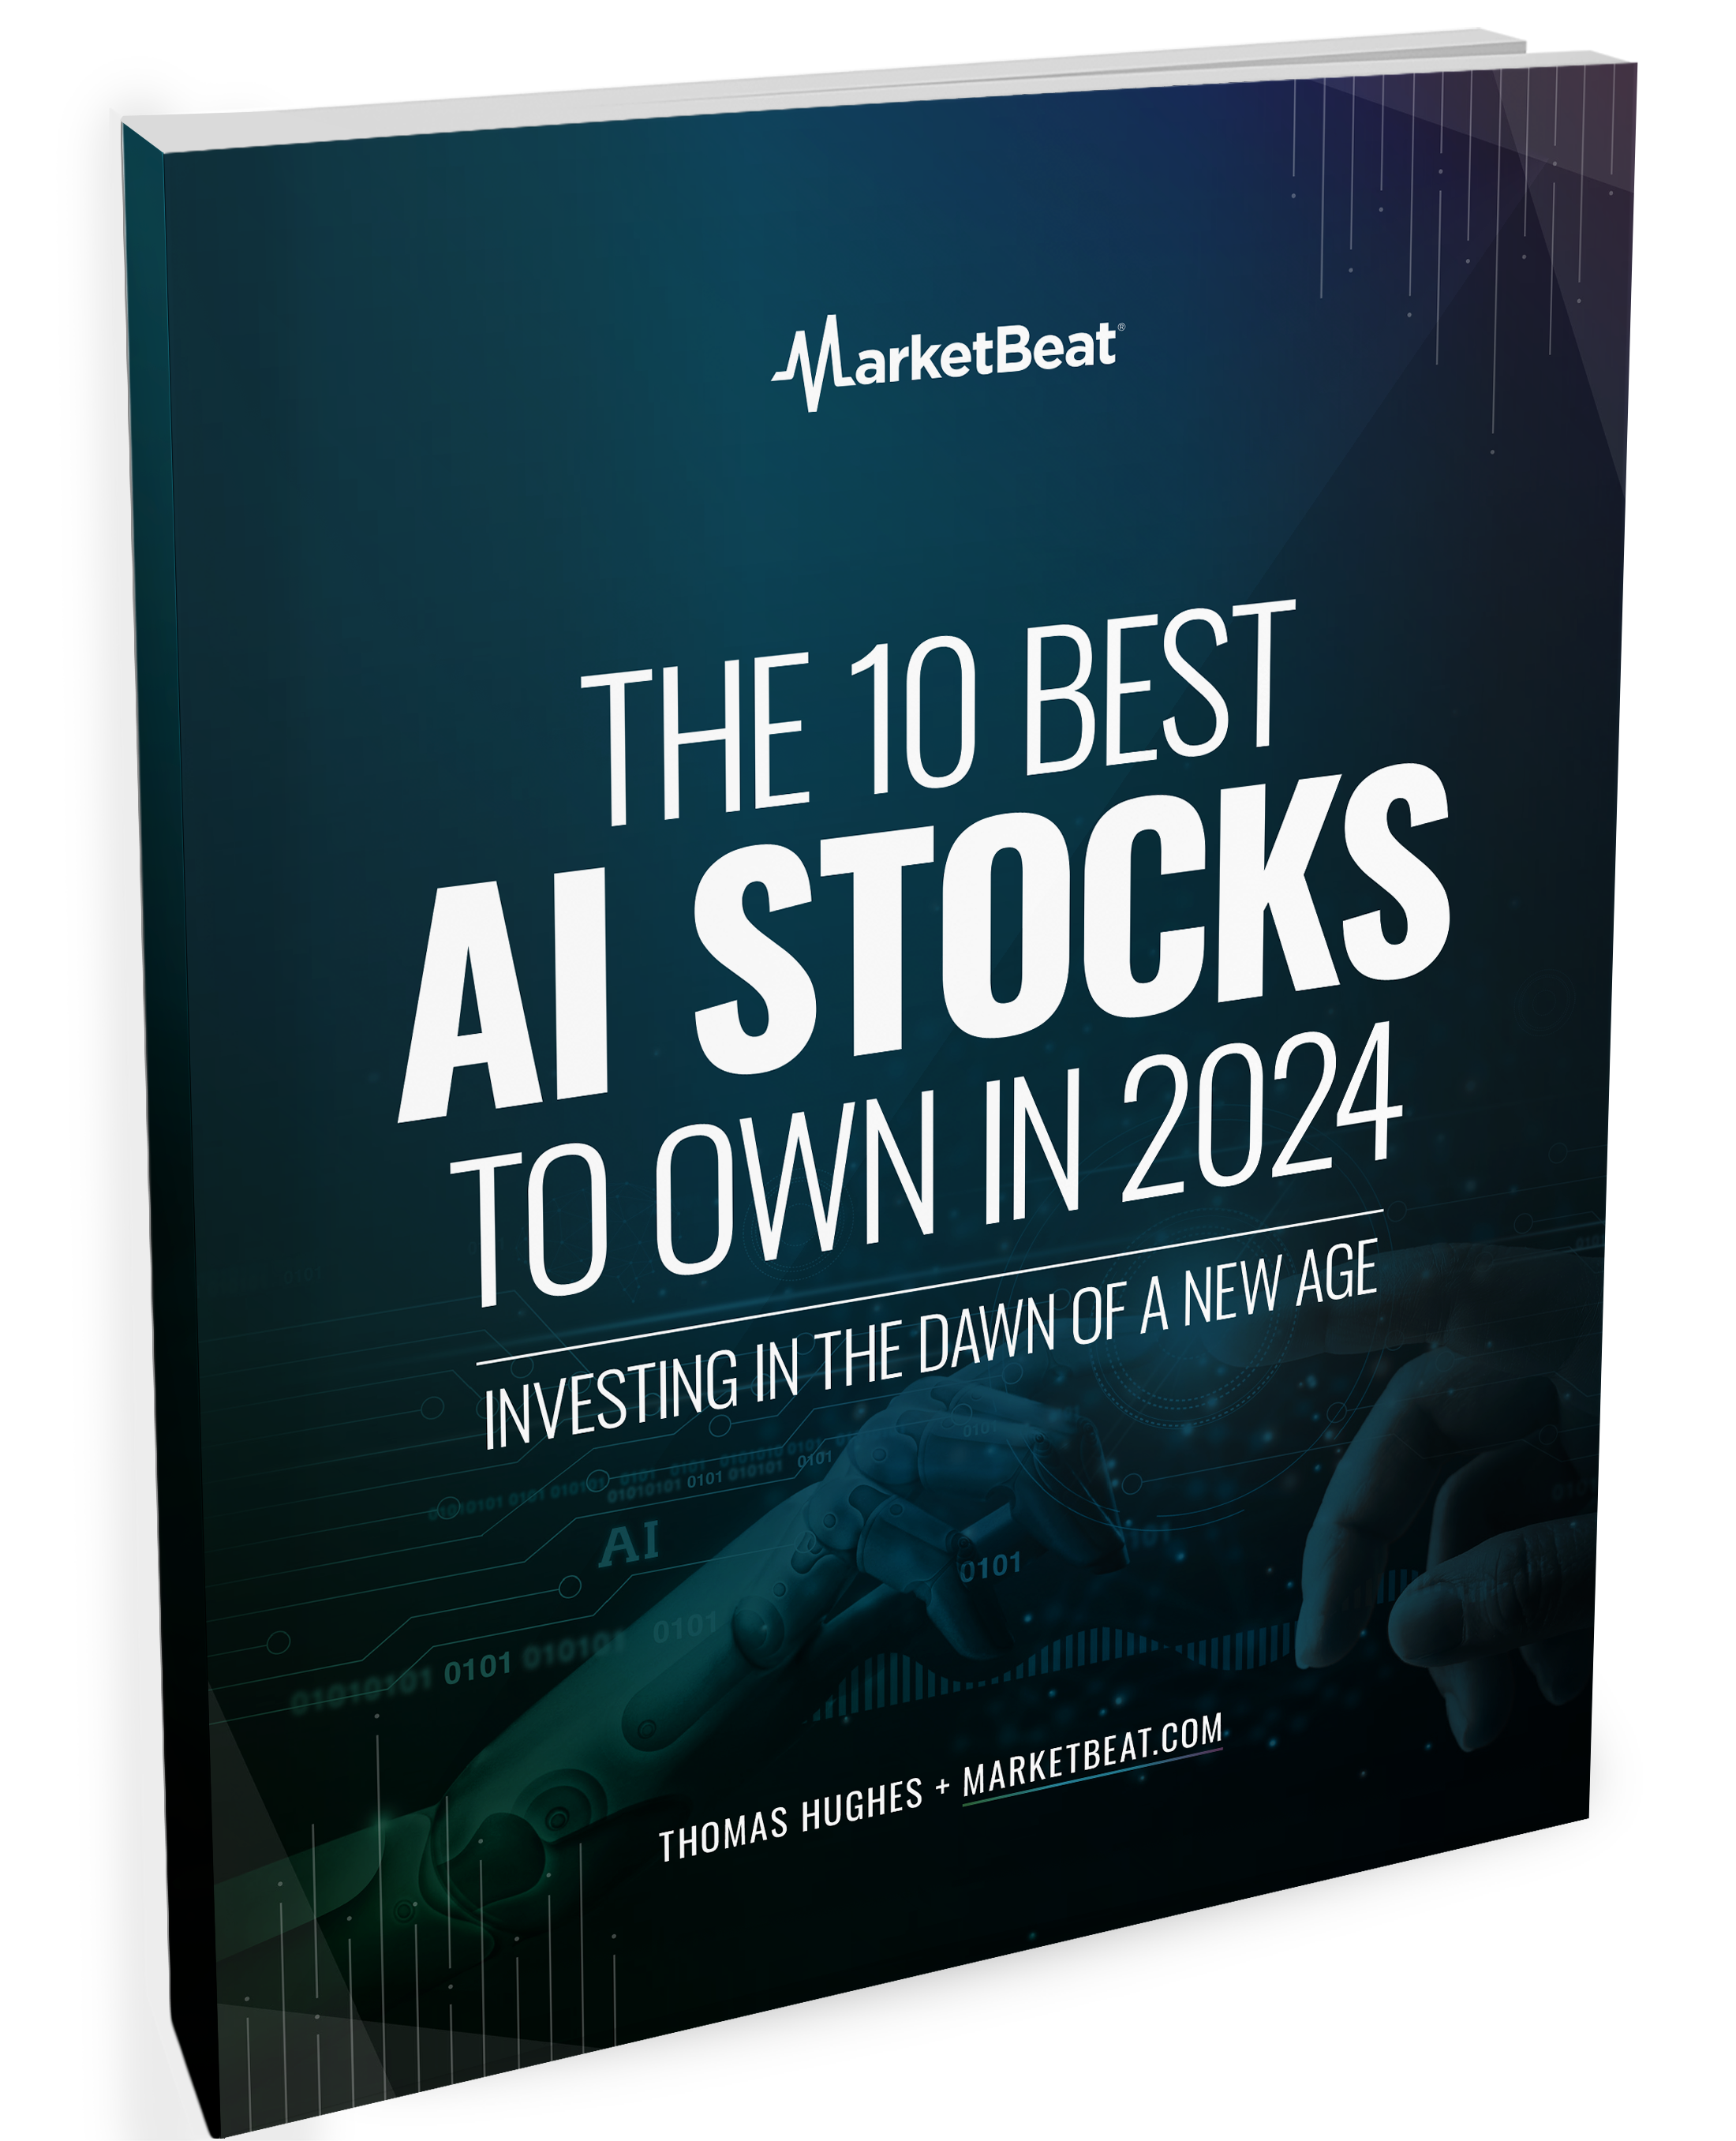 The 10 Best AI Stocks to Own in 2024 cover image